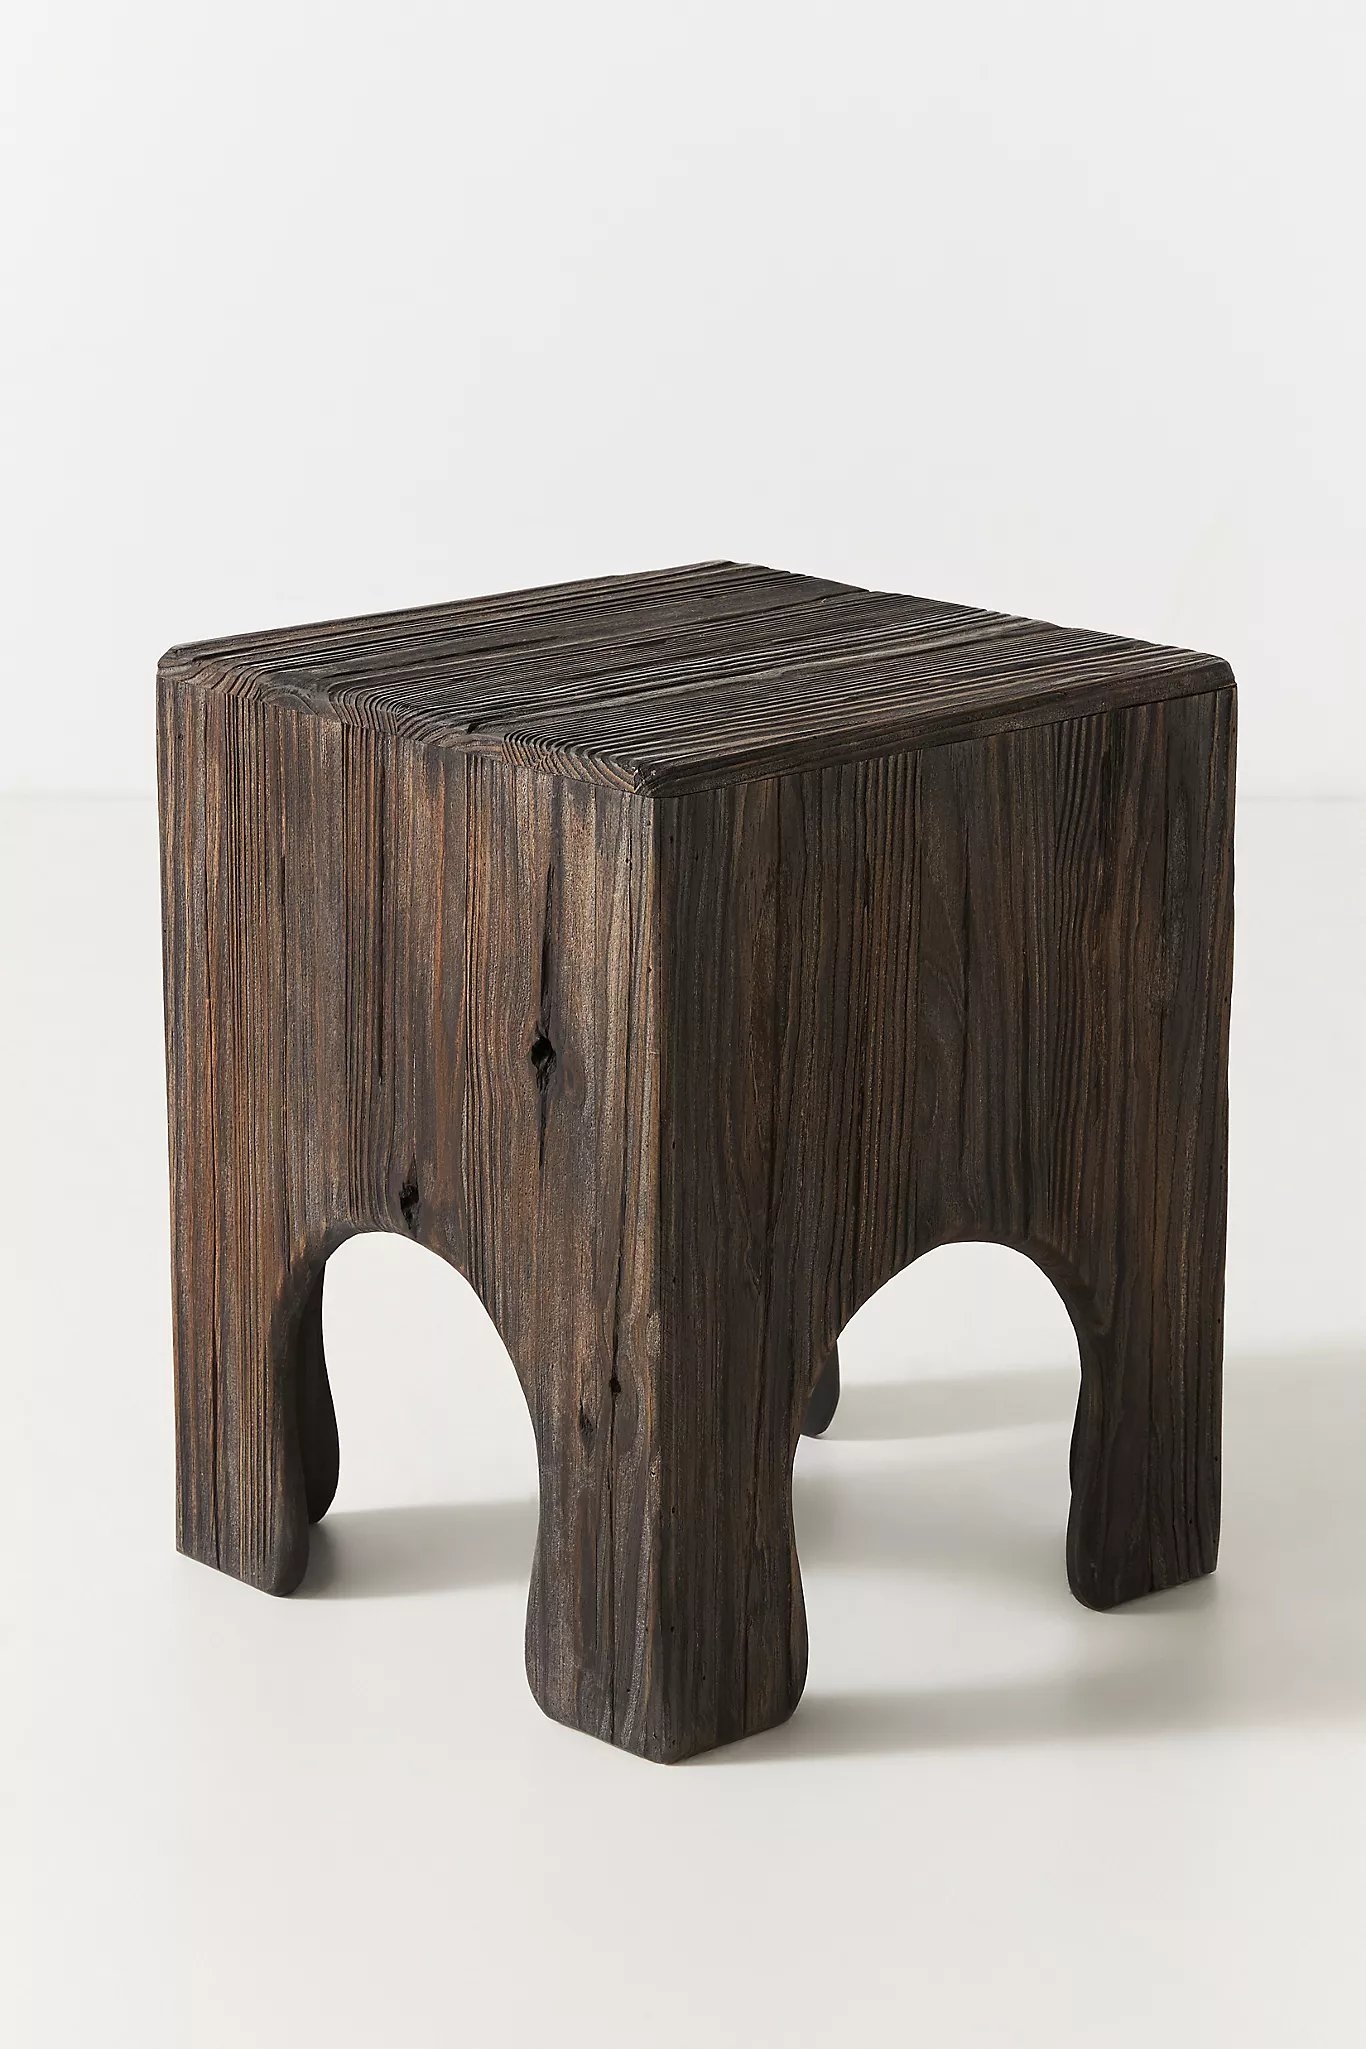 Kiefer Pine Wood Side Table By Anthropologie in Black Size M - Image 1